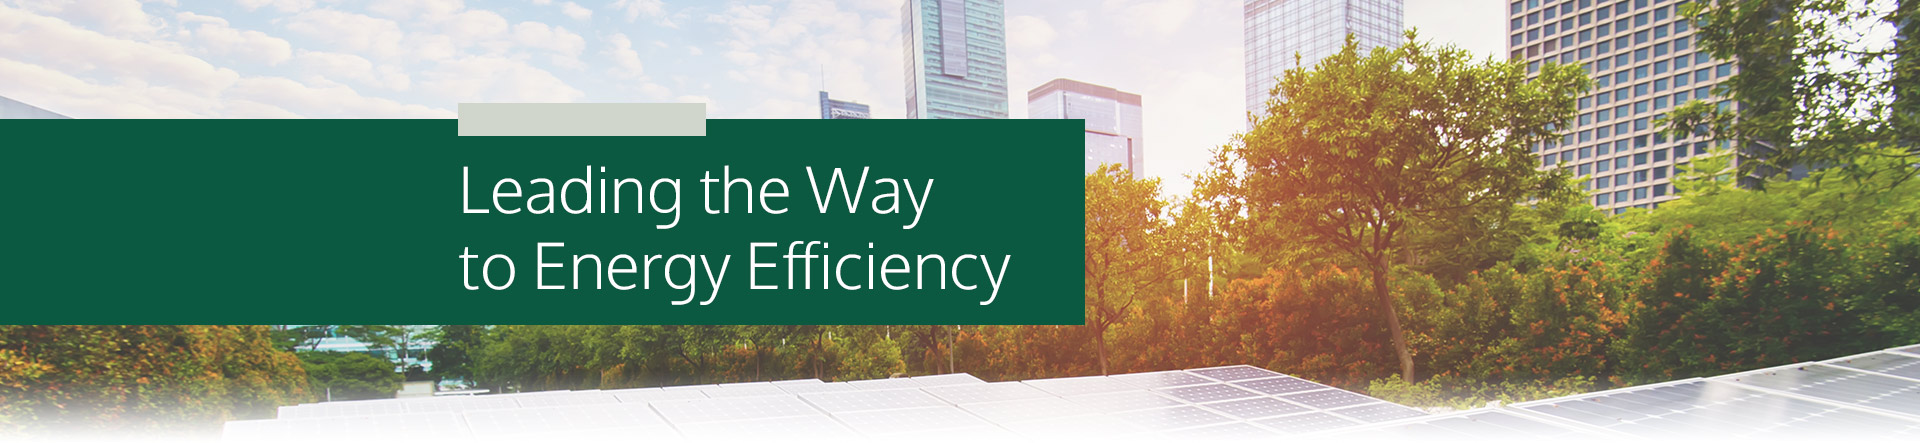 Energy Efficiency and Carbon Reduction